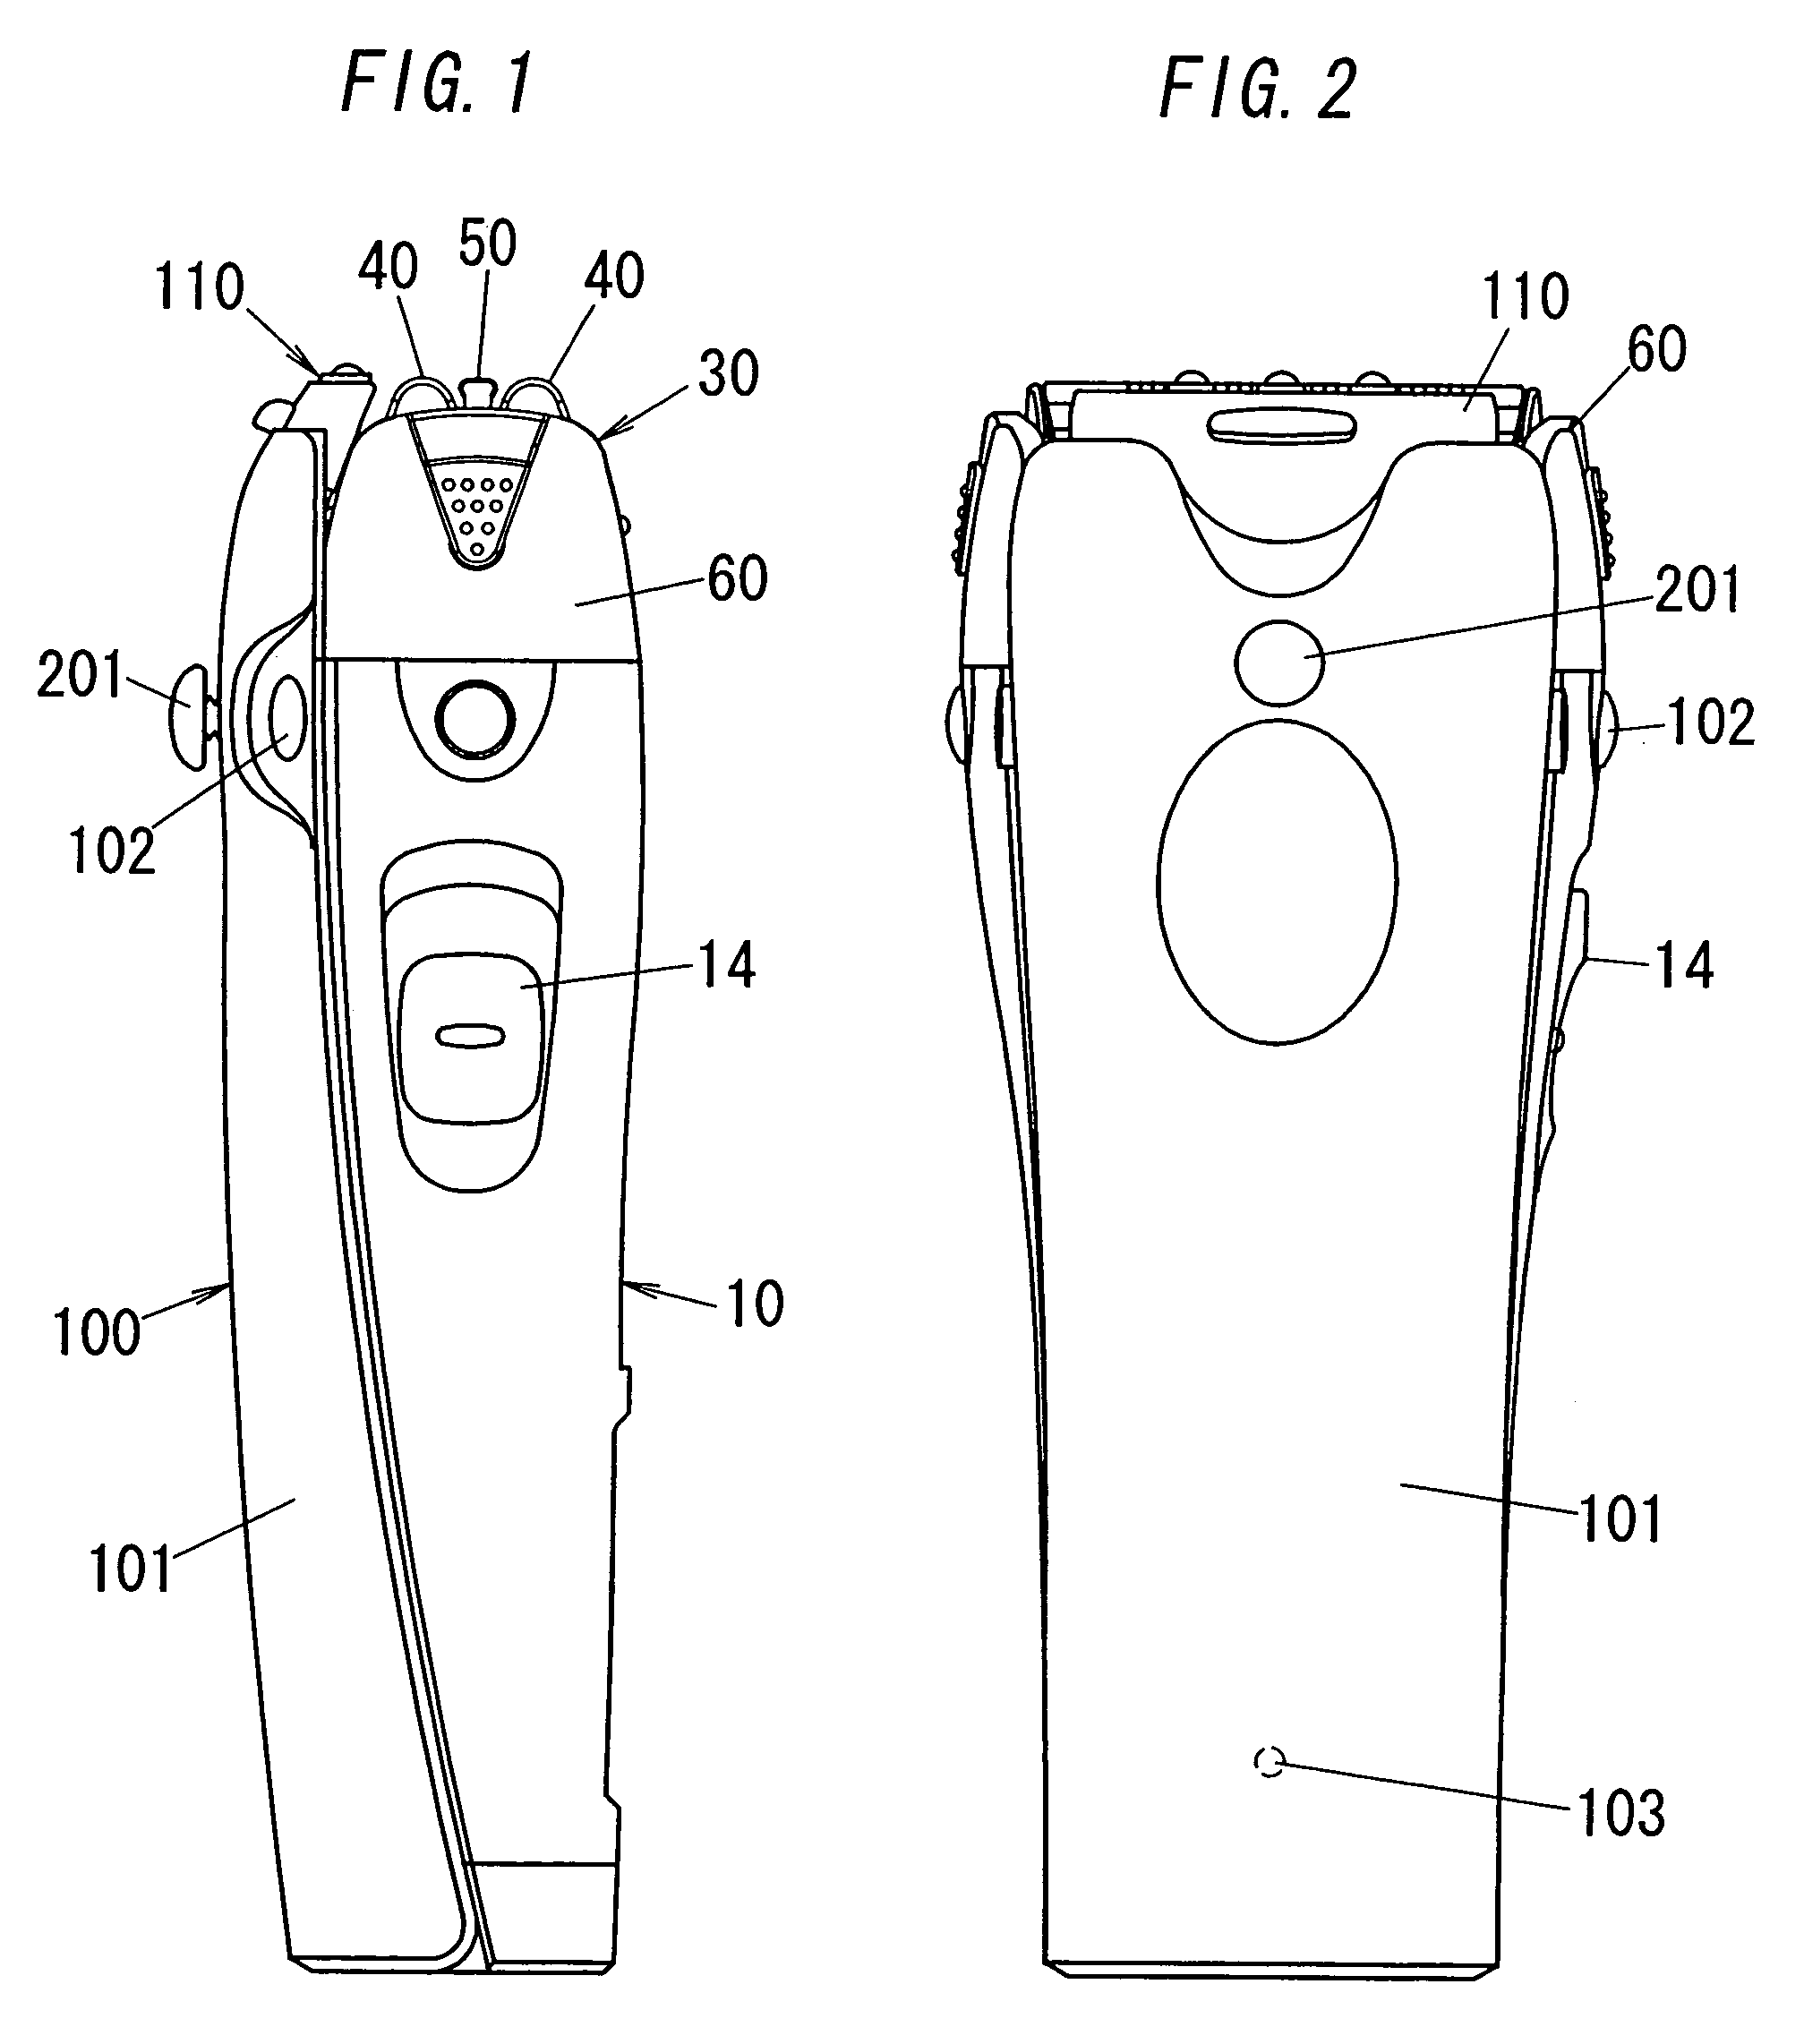 Hair removing device with a lotion applicator